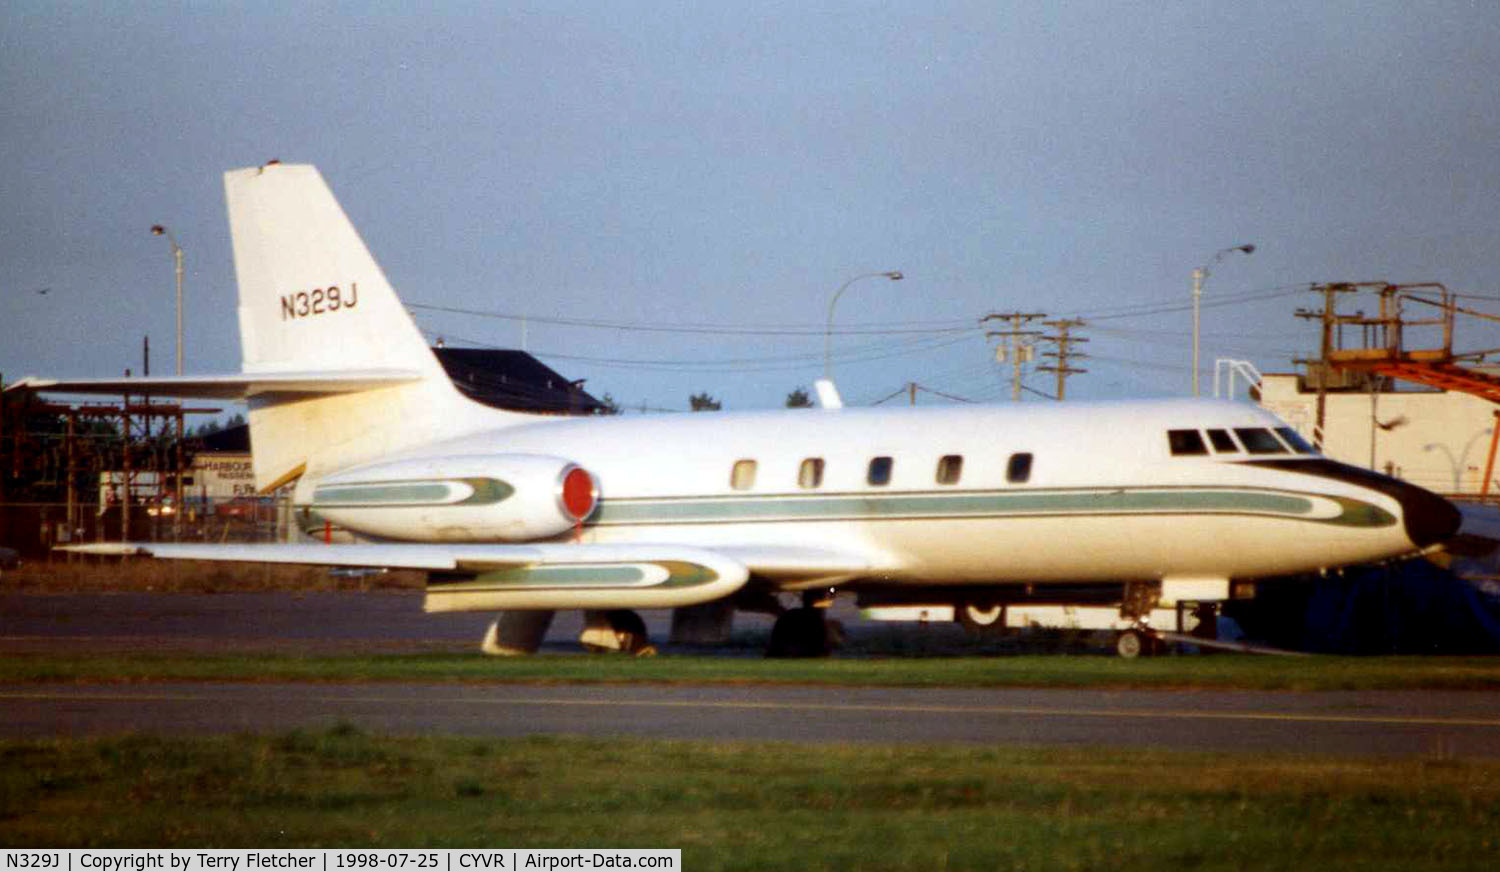 N329J, 1957 Lockheed L-1329 Jetstar C/N 1001, These marks were worn by one of the two prototype Lockheed Jetstars - note the prototypes only had two engines unlike the four engines on the production models